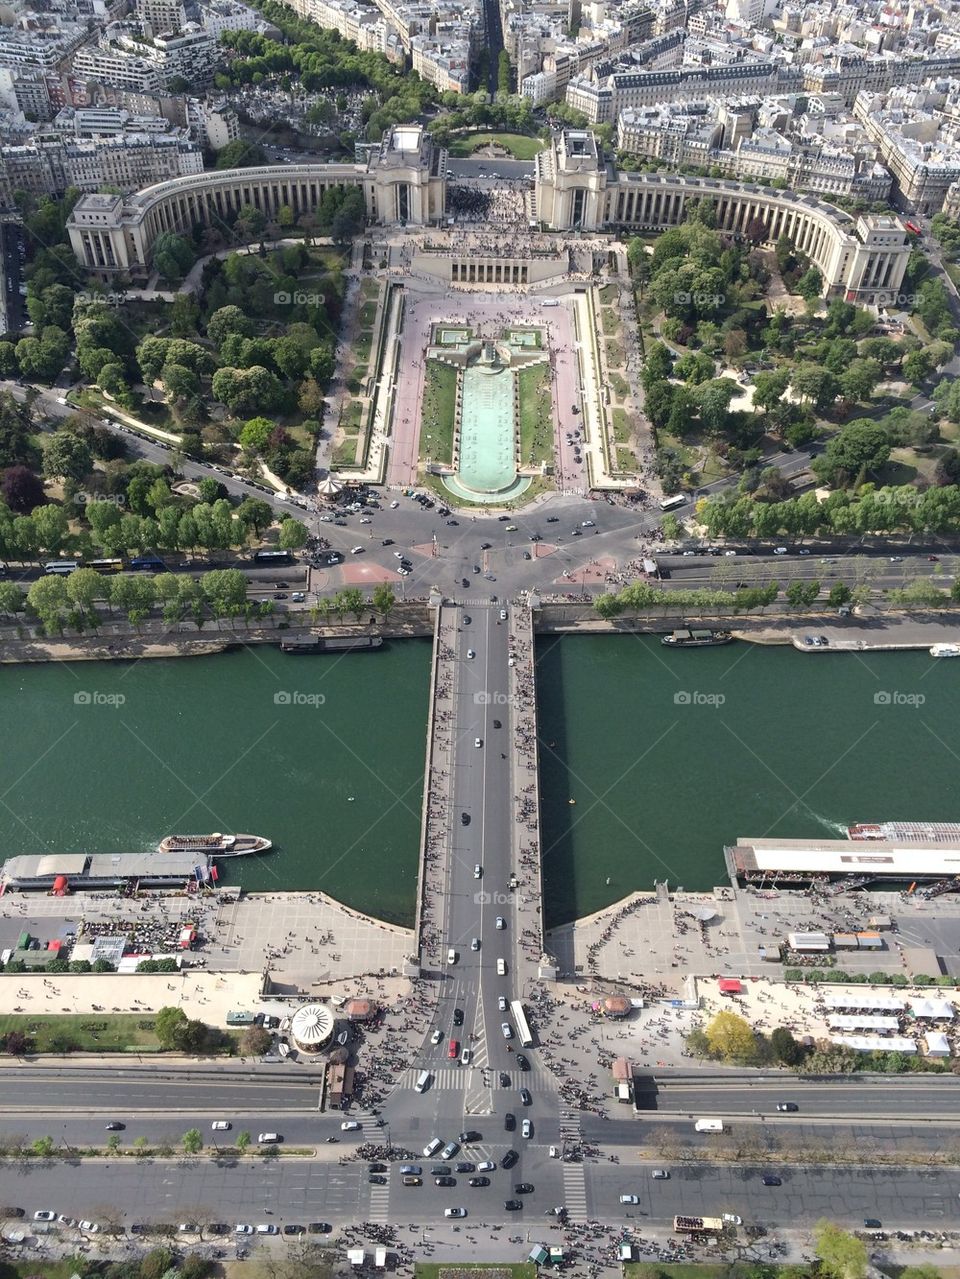 Top of the Eiffel Tower 